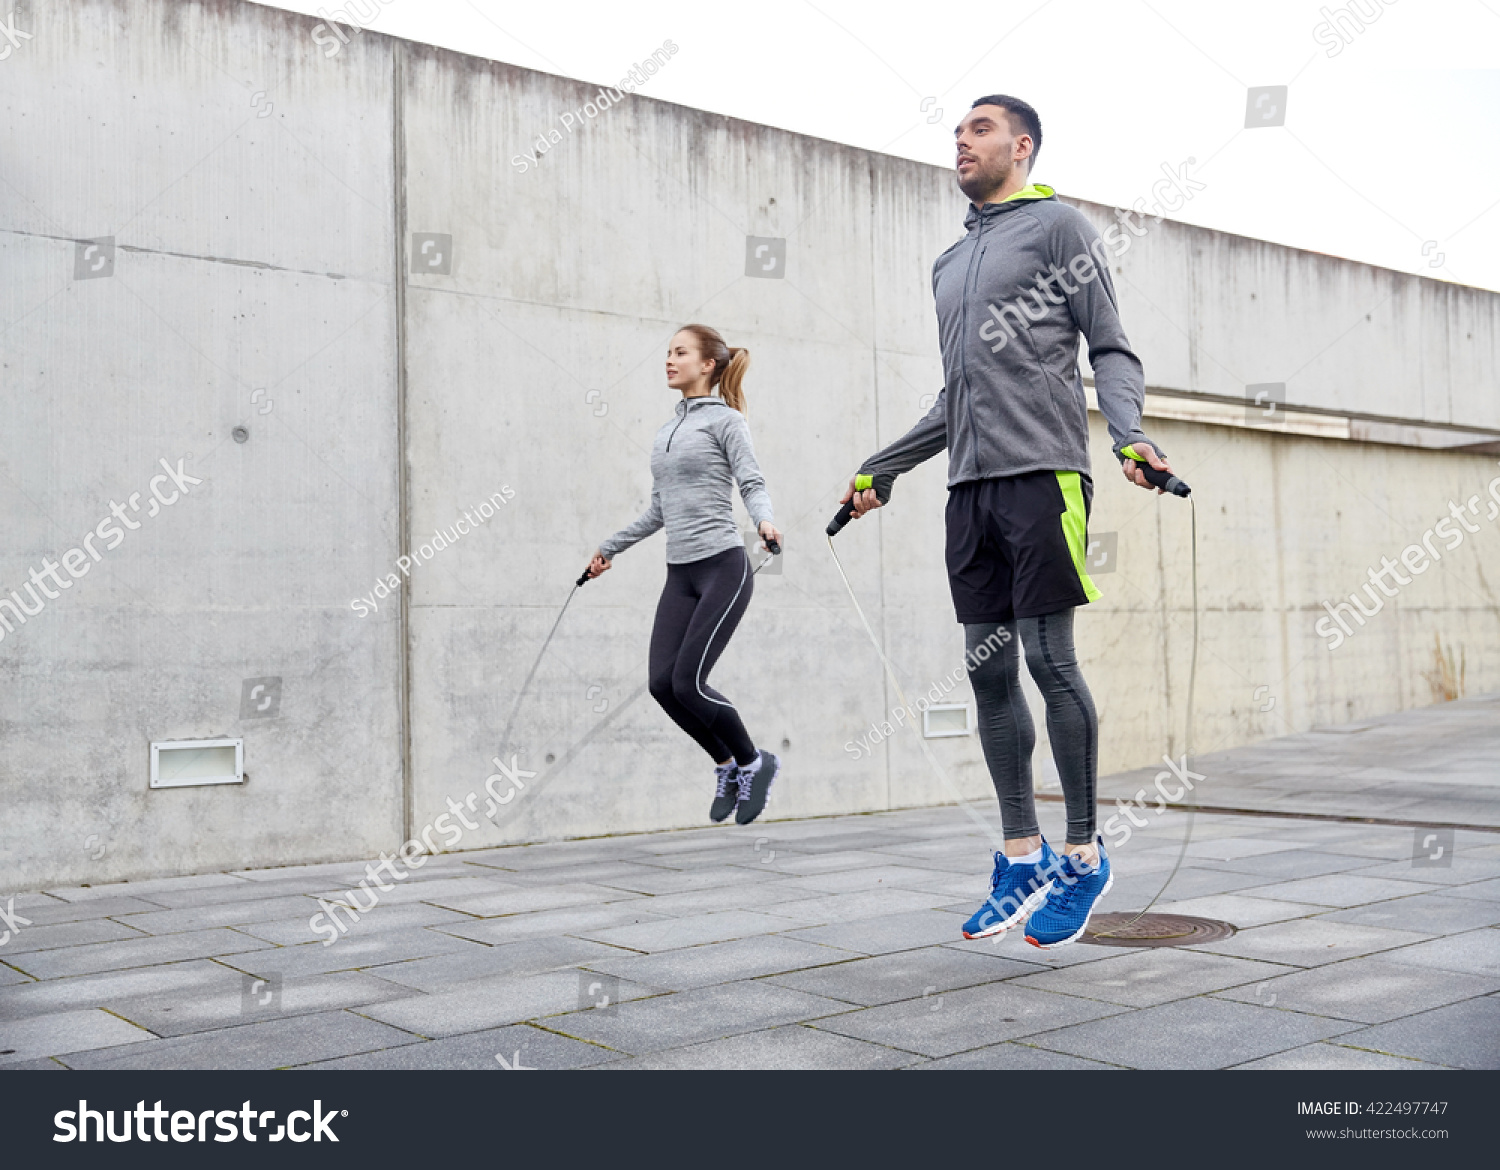 fitness, sport, people, exercising and lifestyle concept - man and woman skipping with jump rope outdoors #422497747